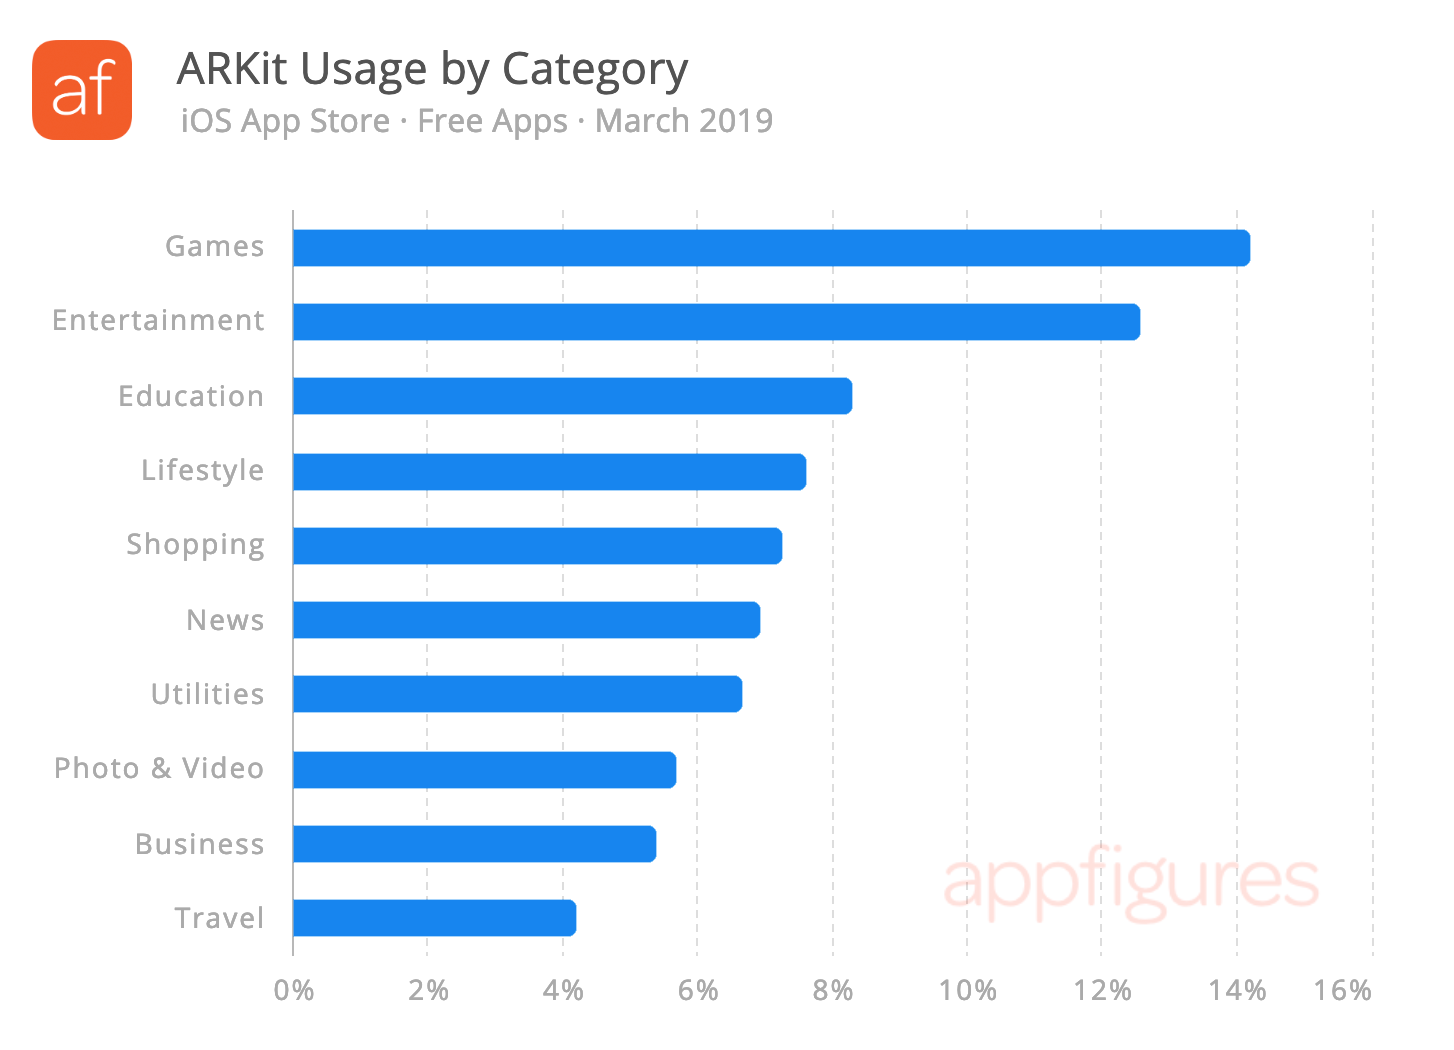 ARKit usage in free iOS apps by category on the iOS App Store